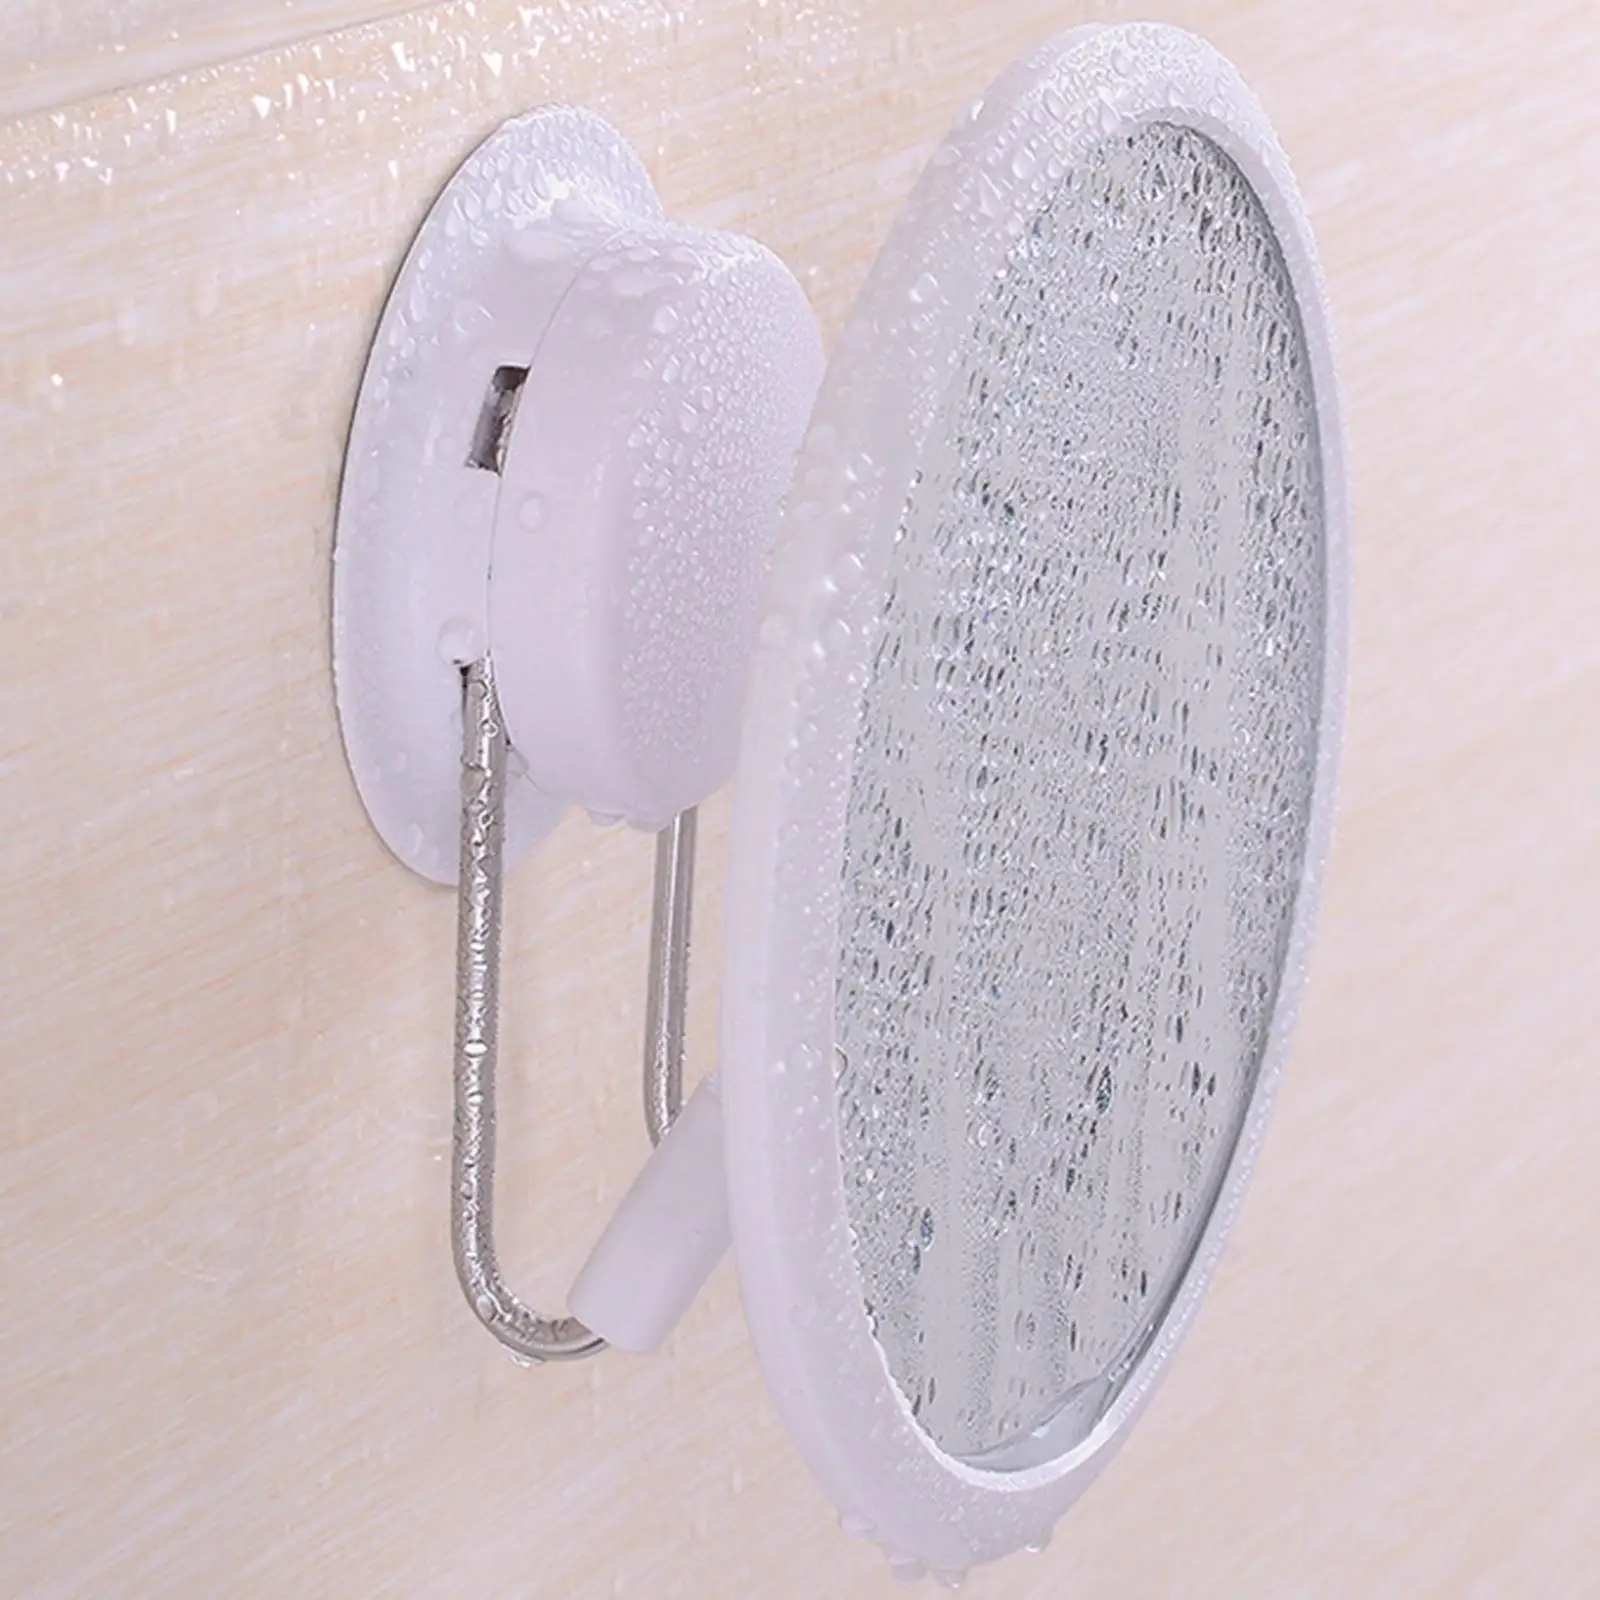 Household Wall Mounted Makeup Mirror Punch Free Folding Rotatable Mirror Without Traces No Damage to The Wall